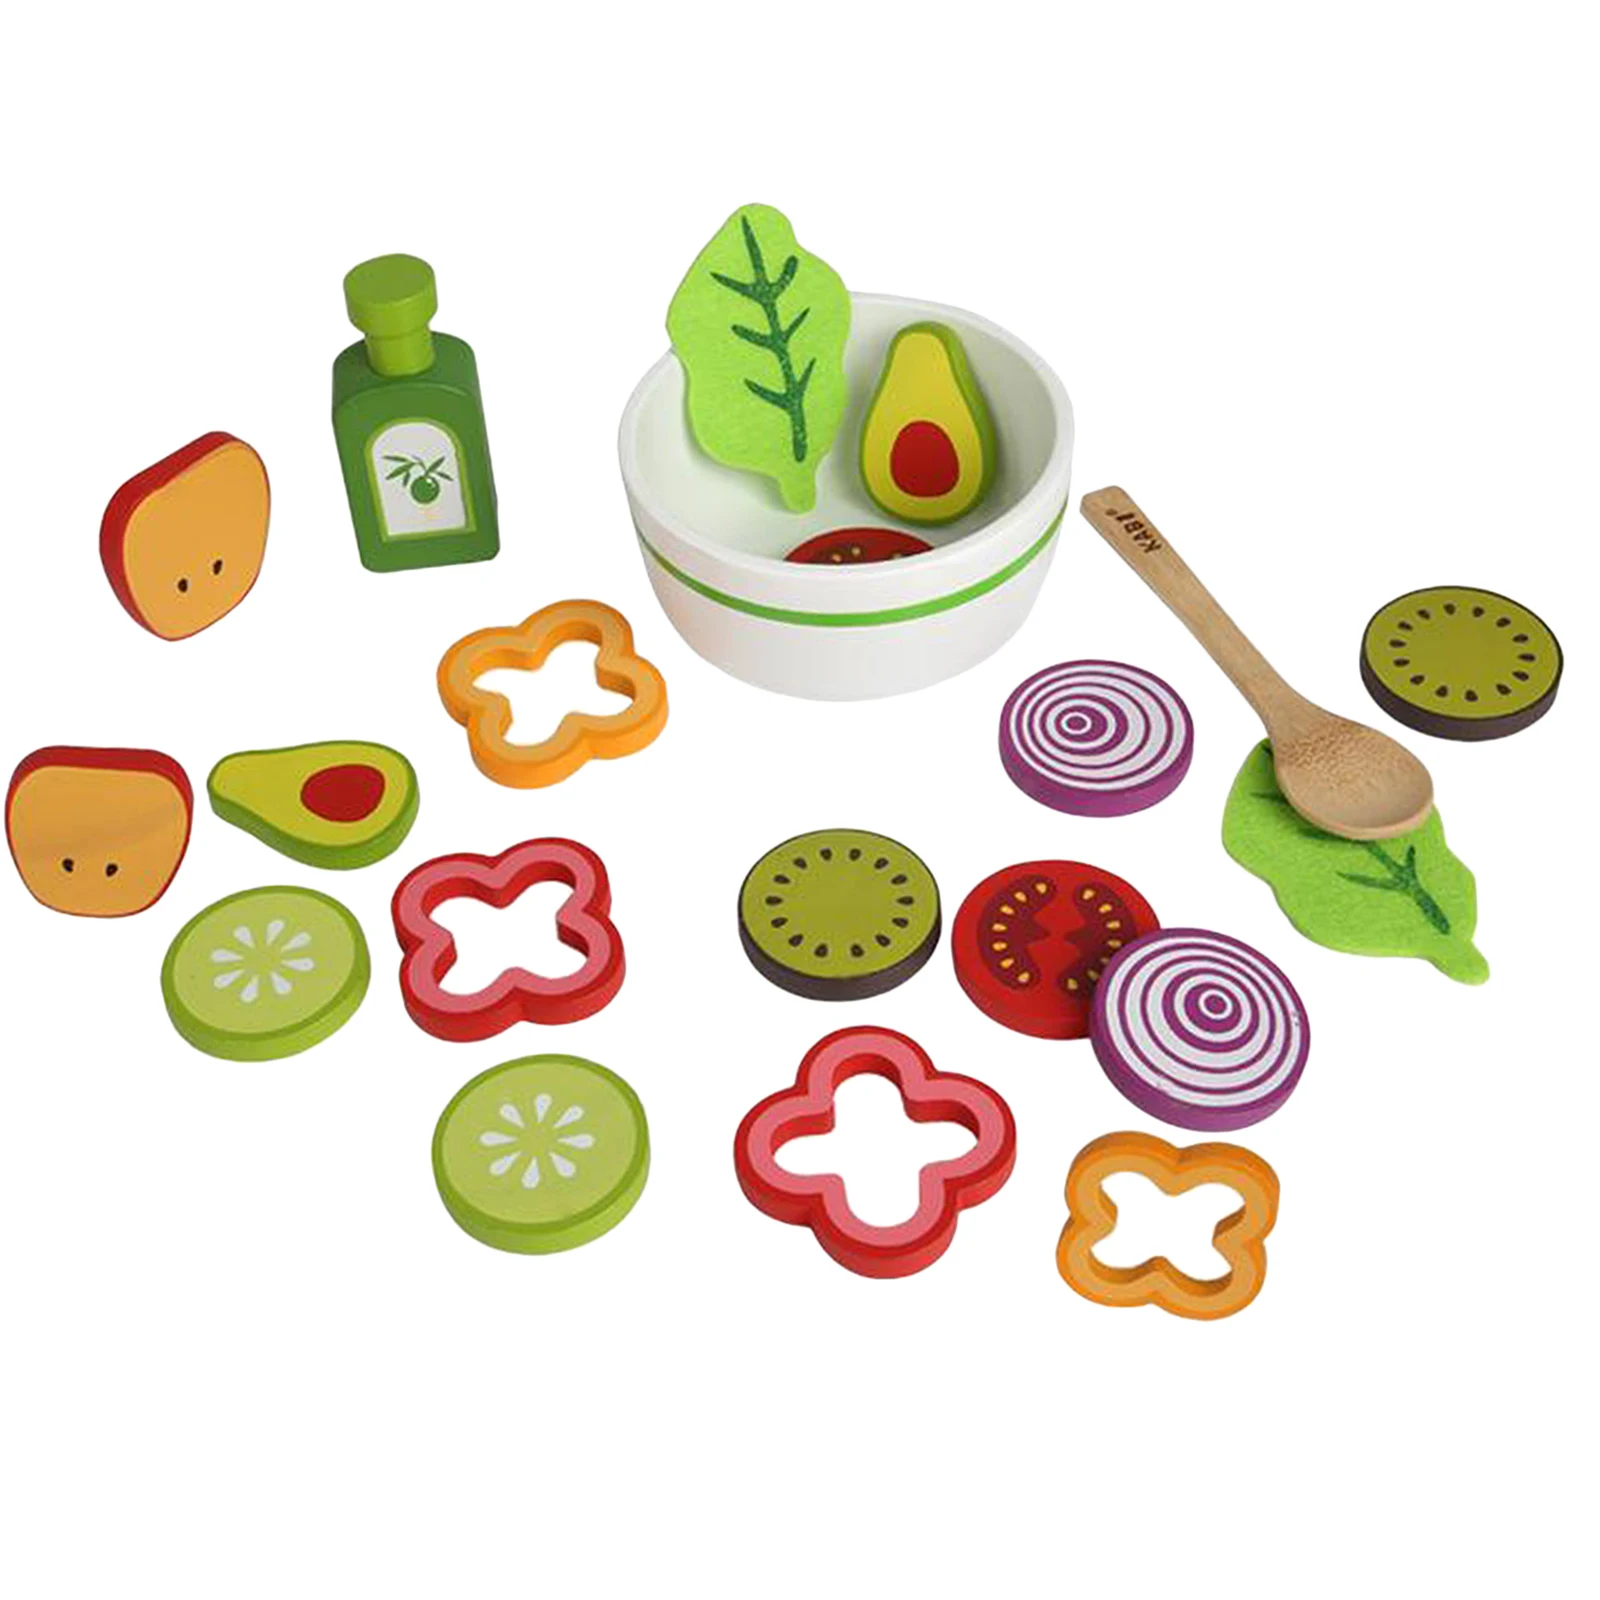 Children's Simulation Fruit and Vegetable ,Garden Salad Wood Play ,Kitchen Play